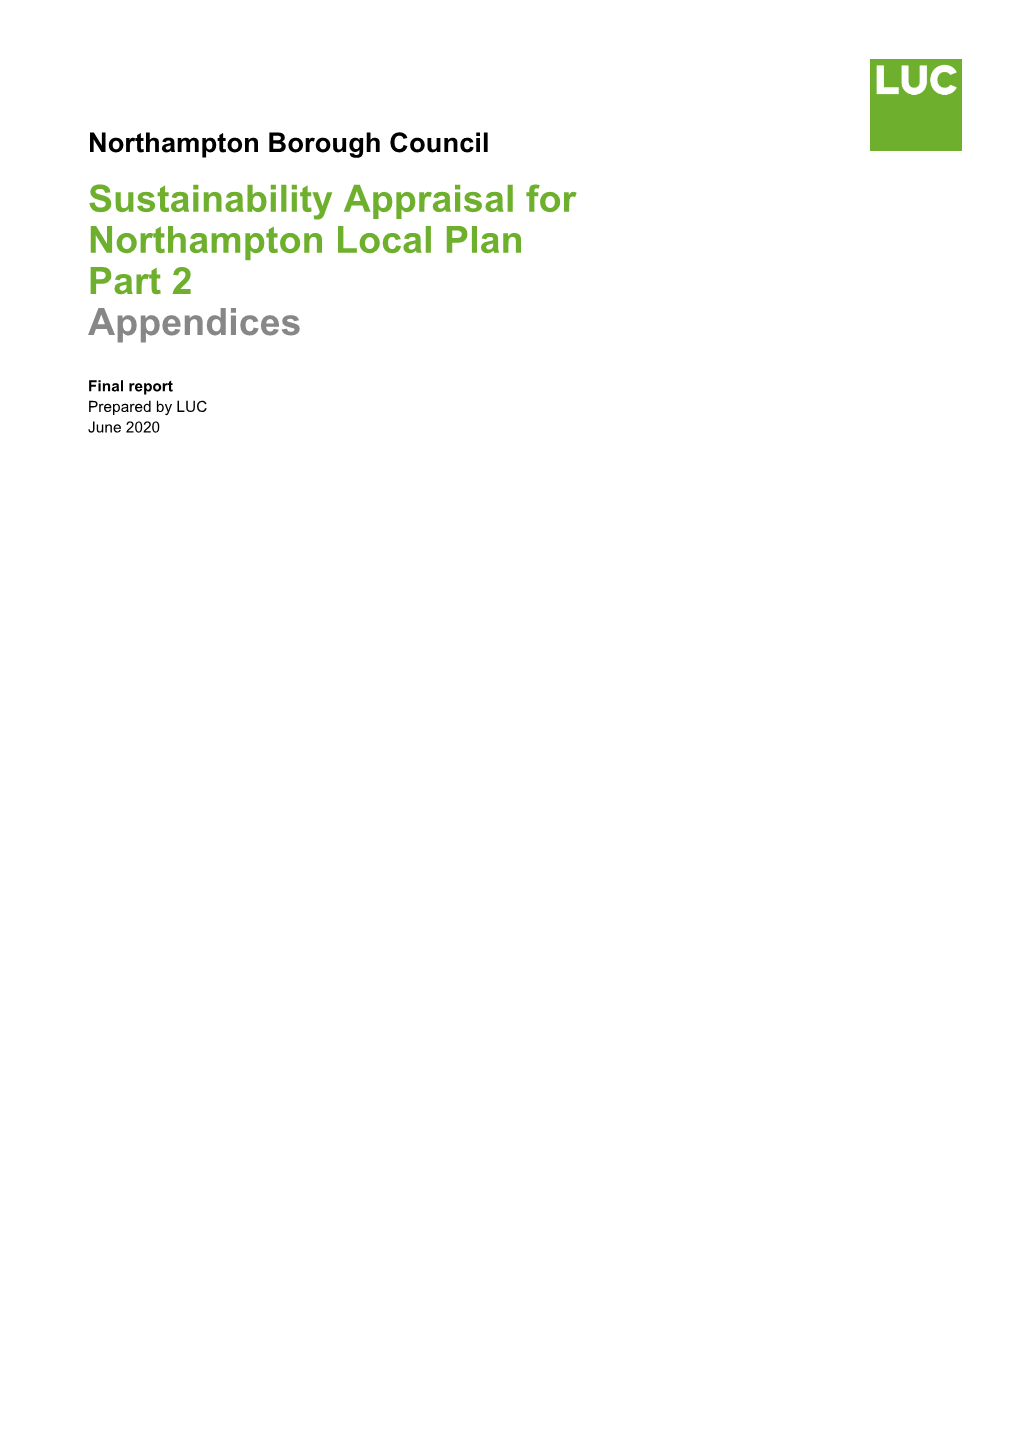 Sustainability Appraisal for Northampton Local Plan Part 2 Appendices